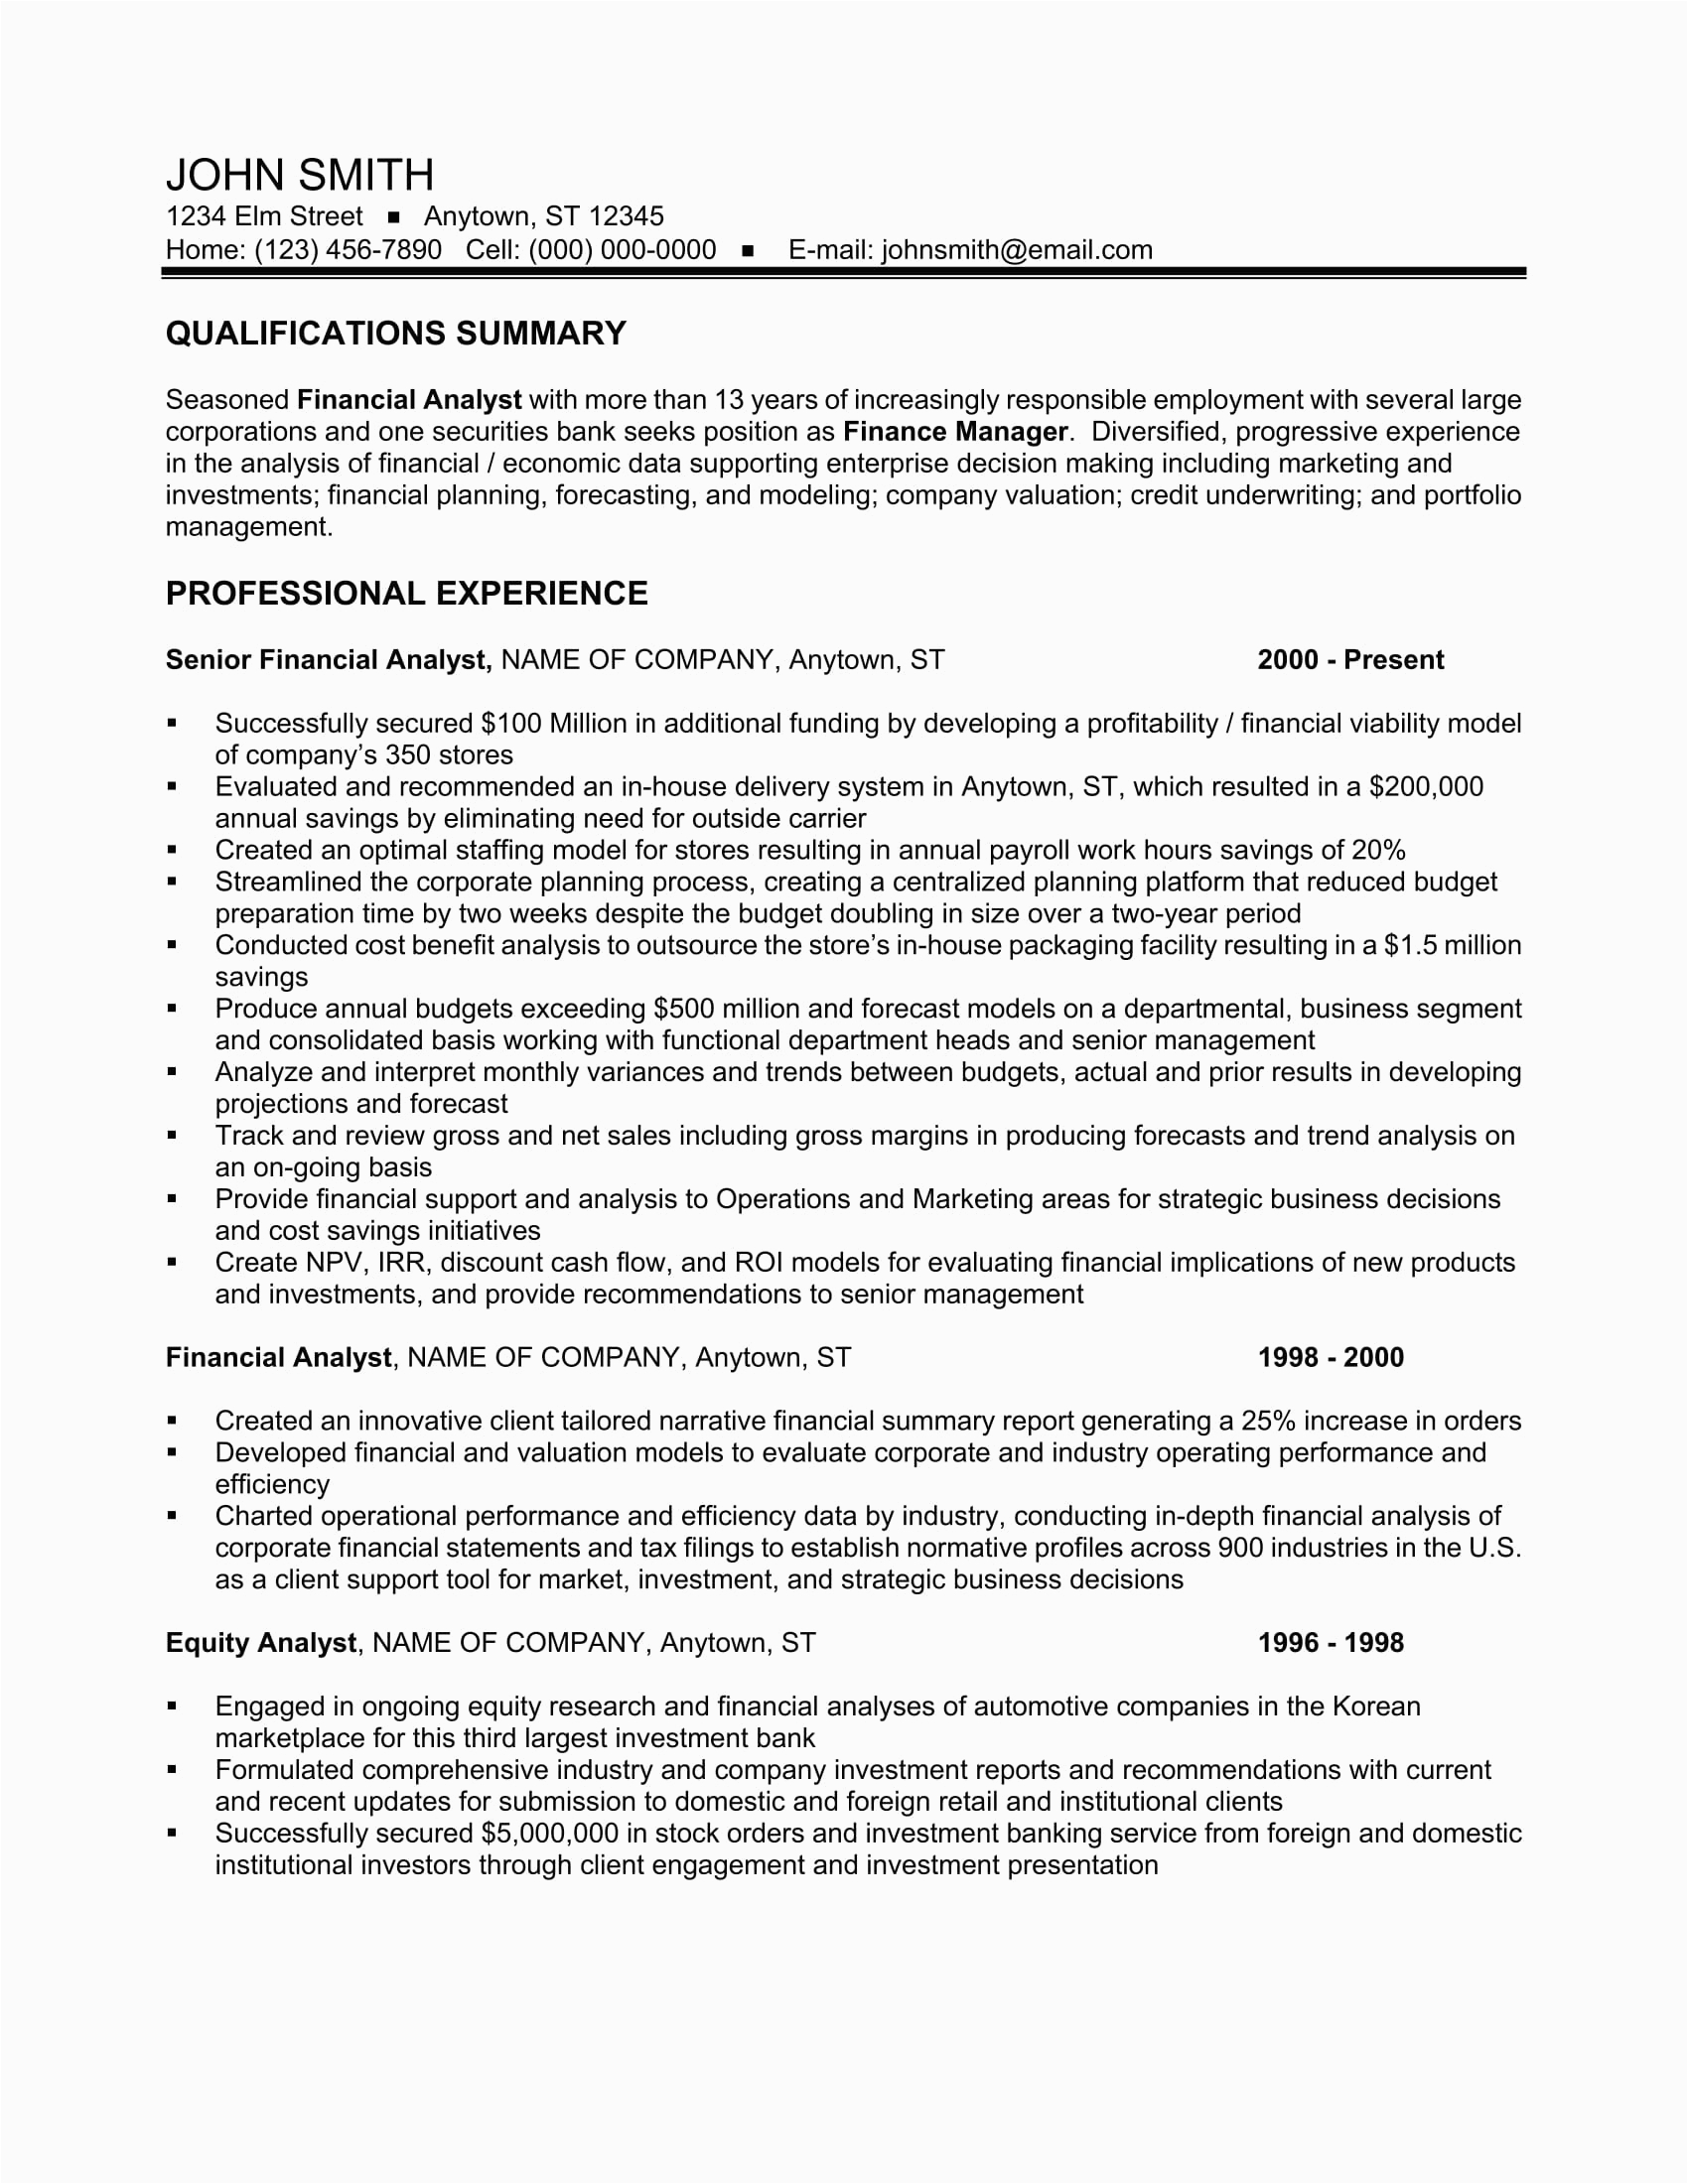 Sample Of Resume for Financial Analyst 24 Best Finance Resume Sample Templates Wisestep